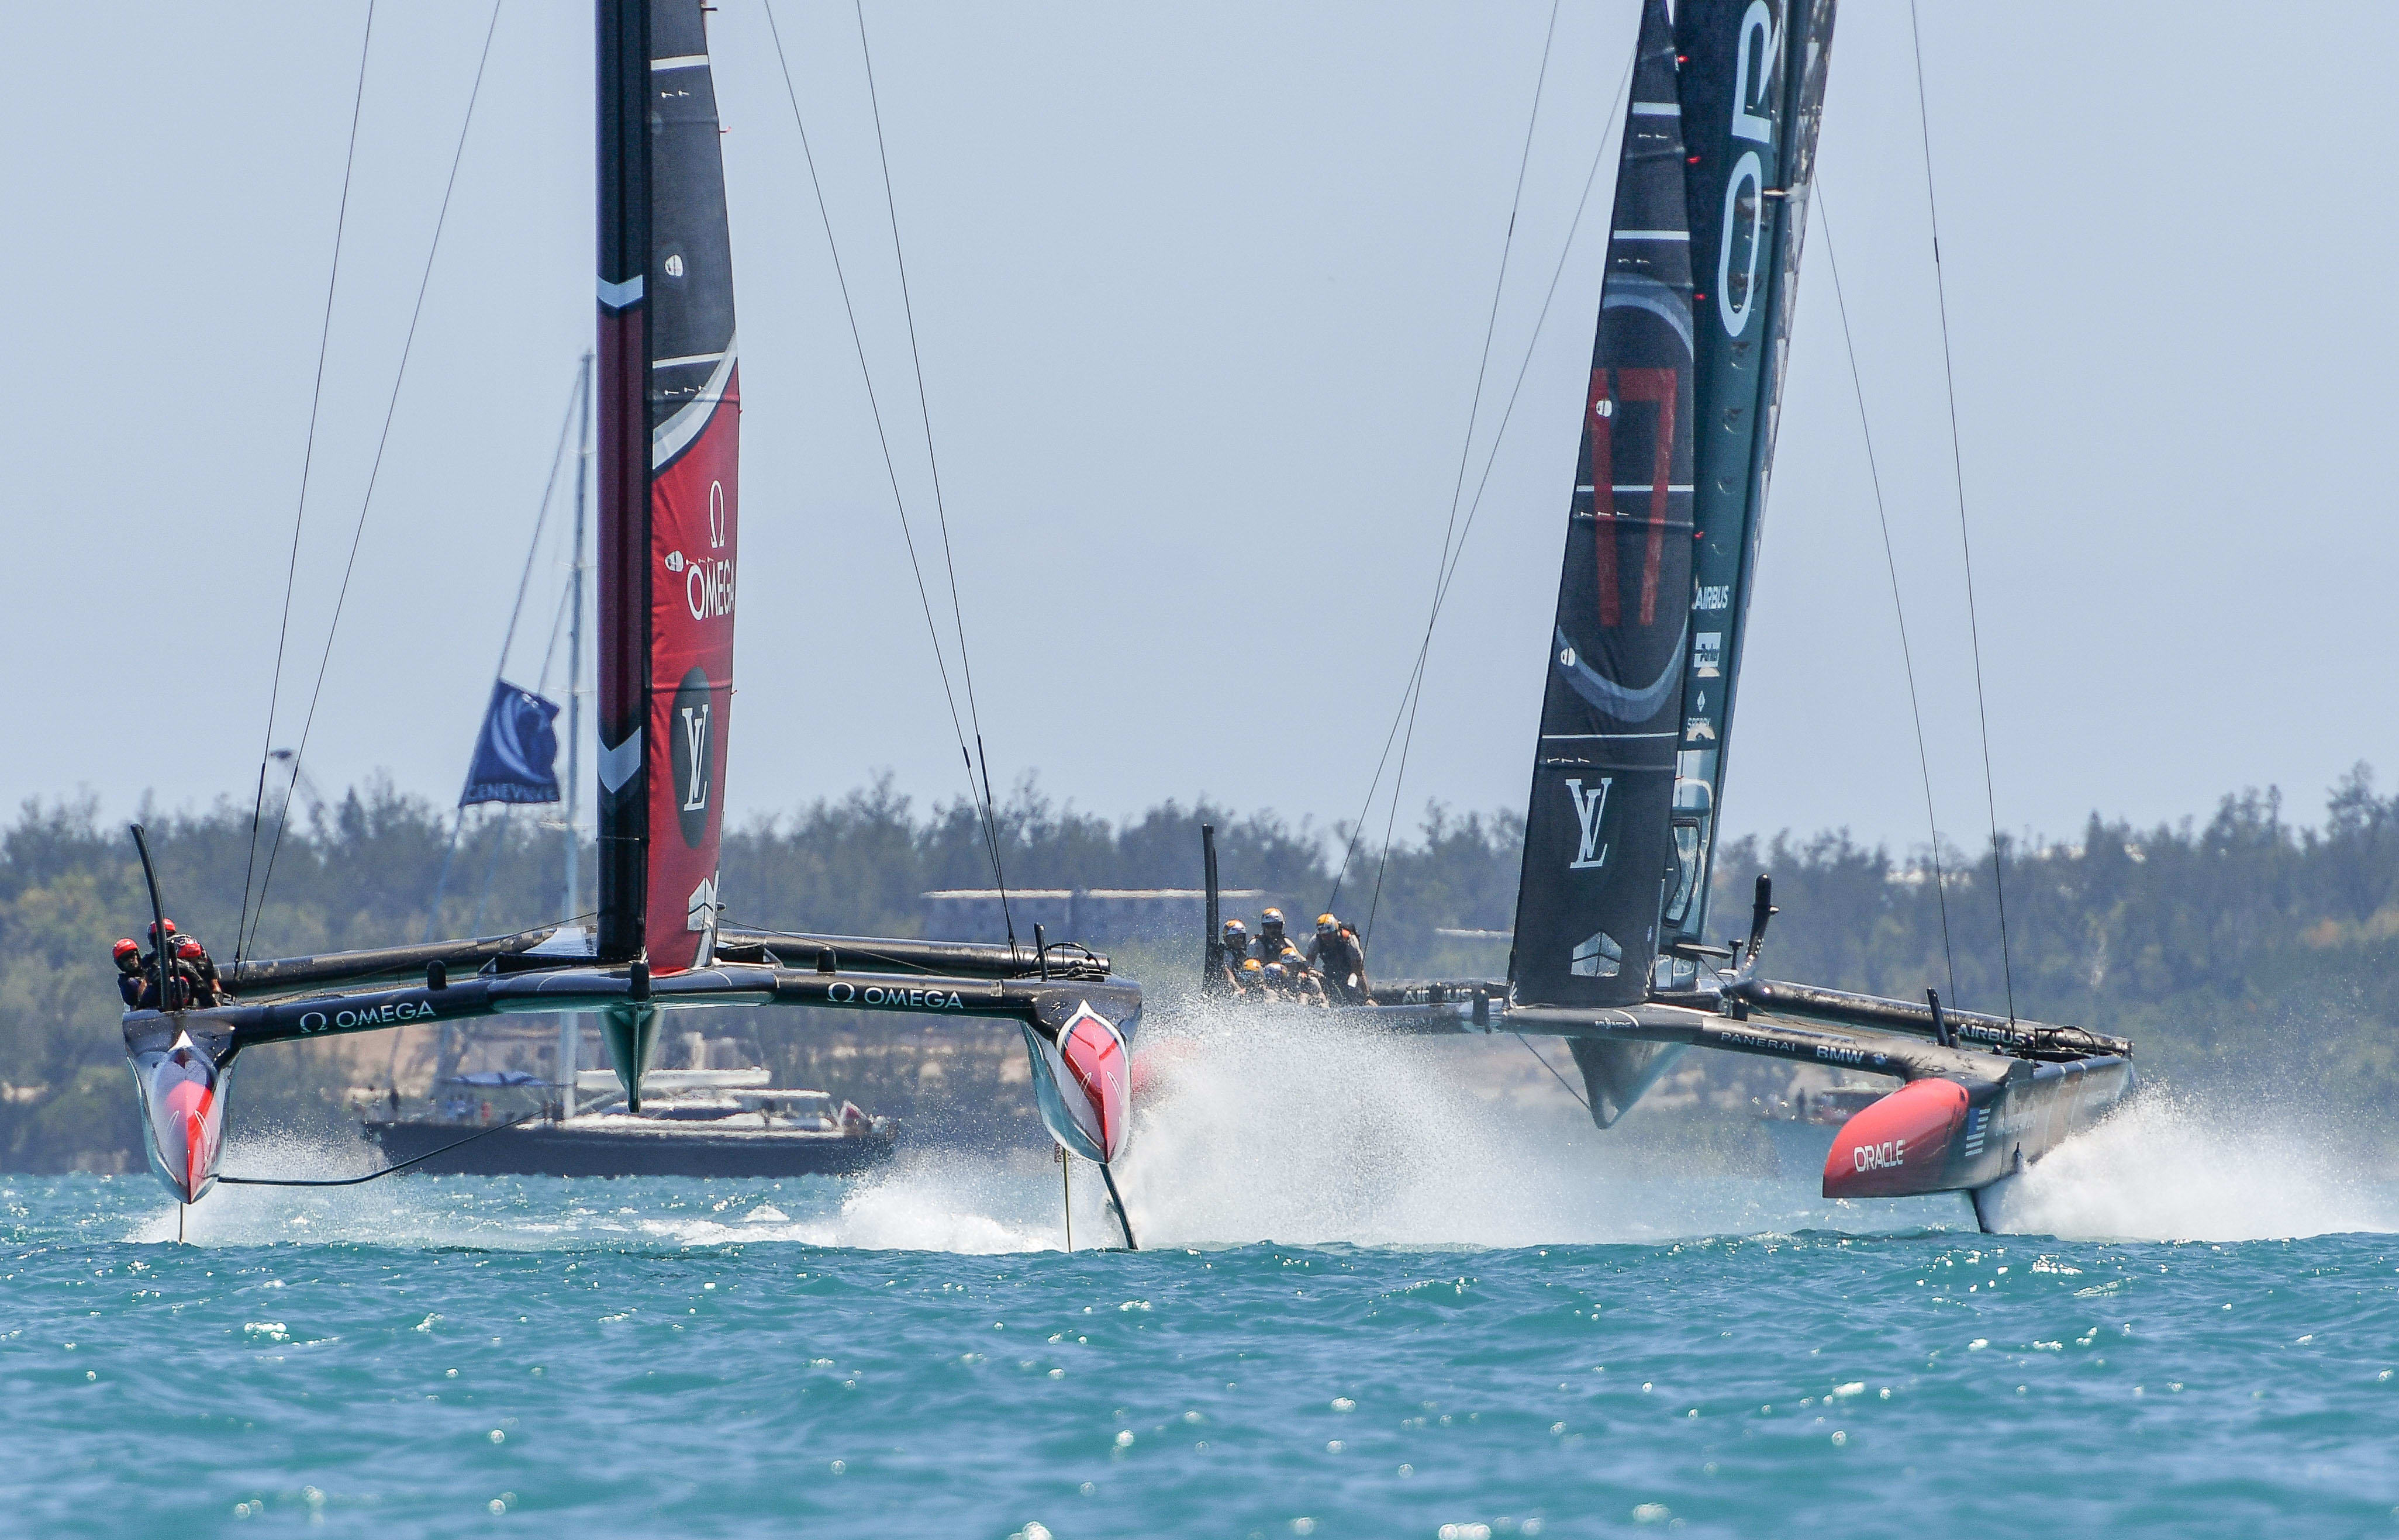 Team New Zealand skippered by Peter Burling races against Oracle Team USA skippered by Jimmy Spithill, Day 2 of the Cup match, 18th (19thNZ) June.